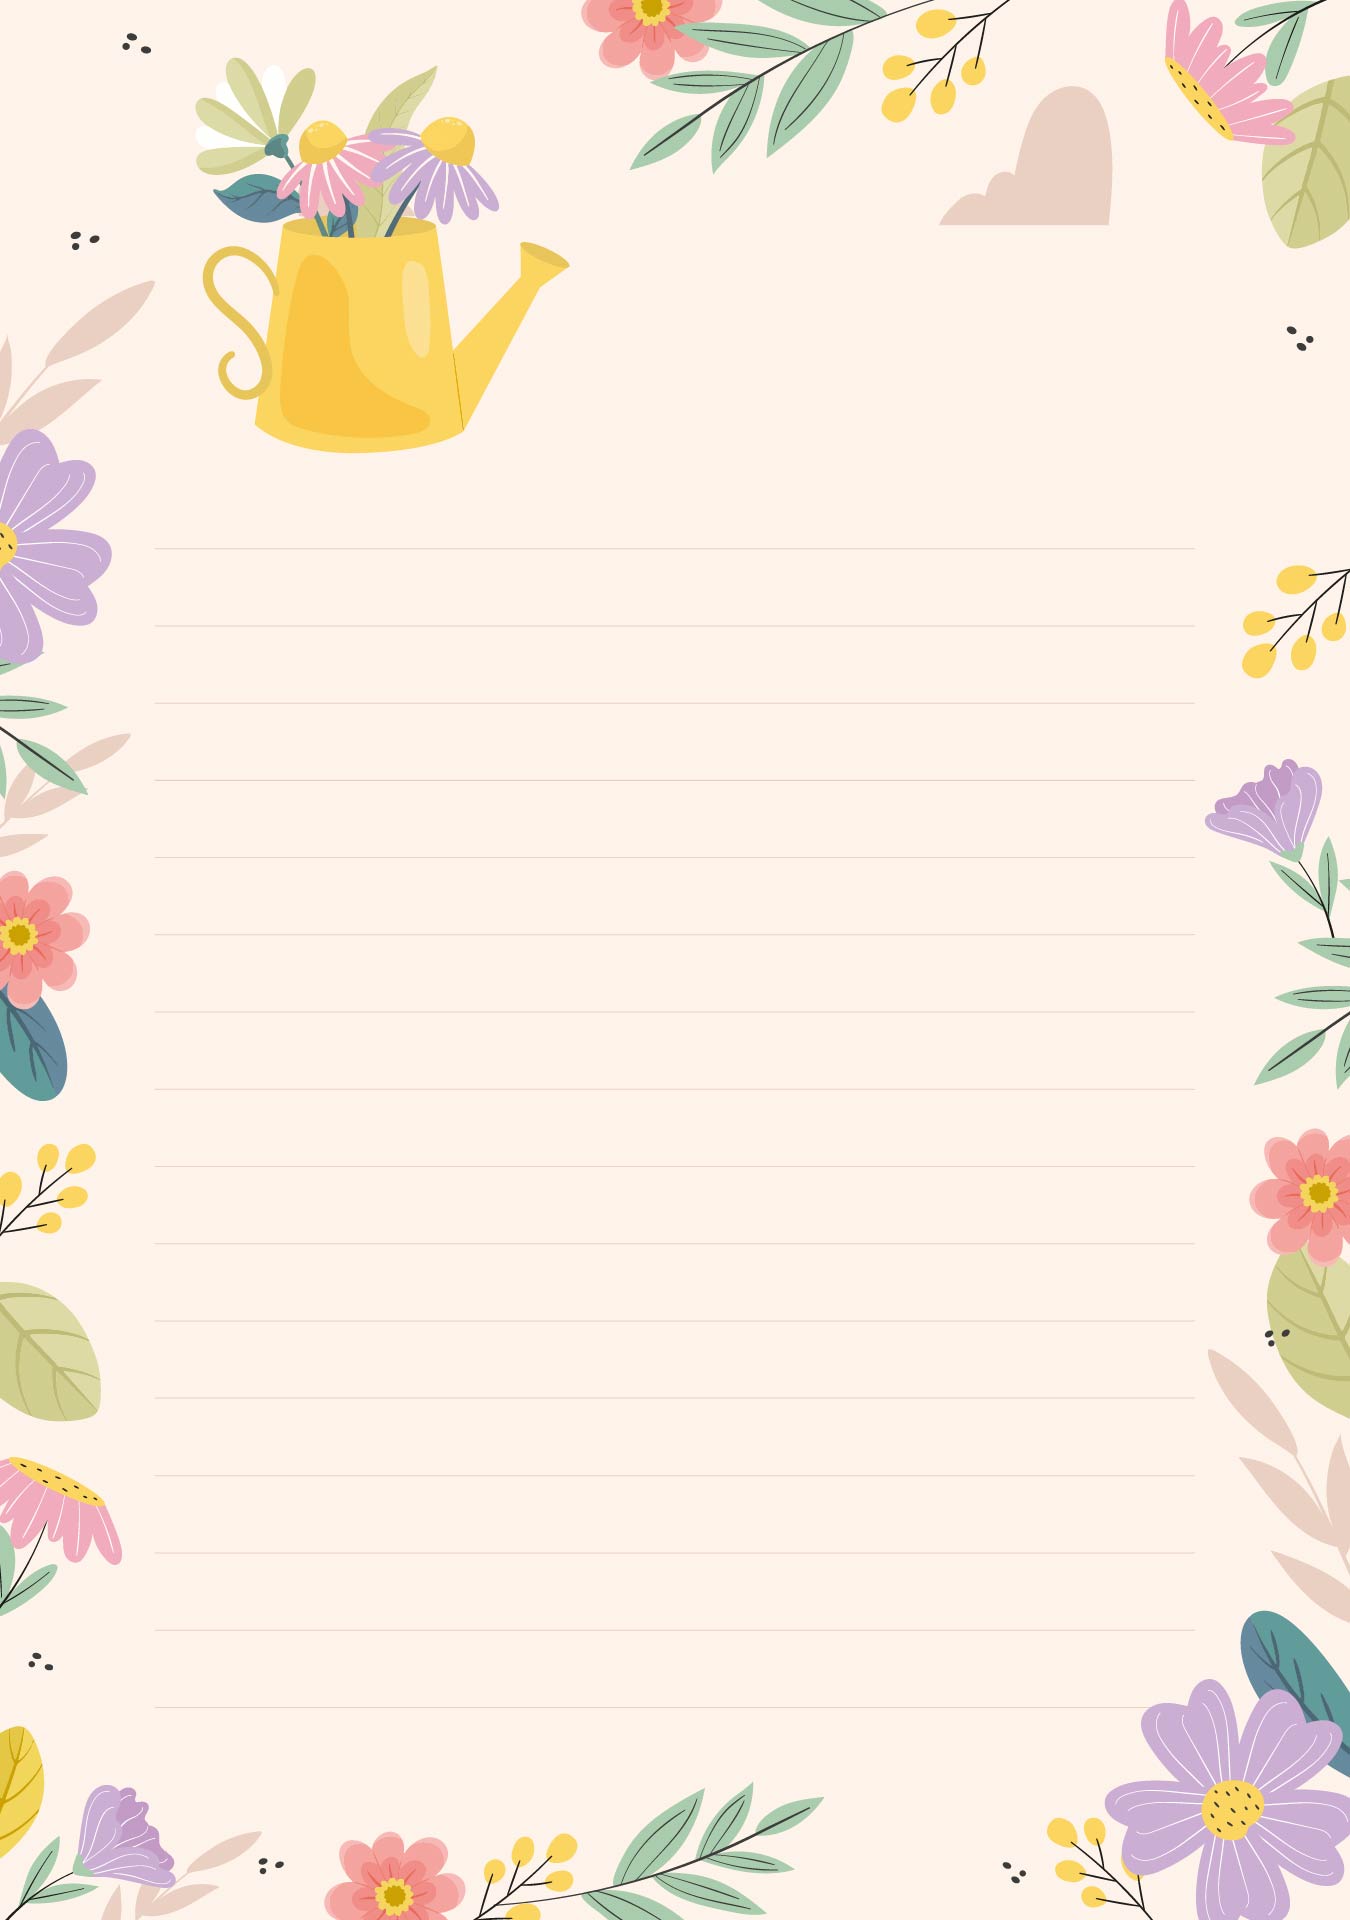 5-best-images-of-spring-writing-paper-printable-free-printable-border